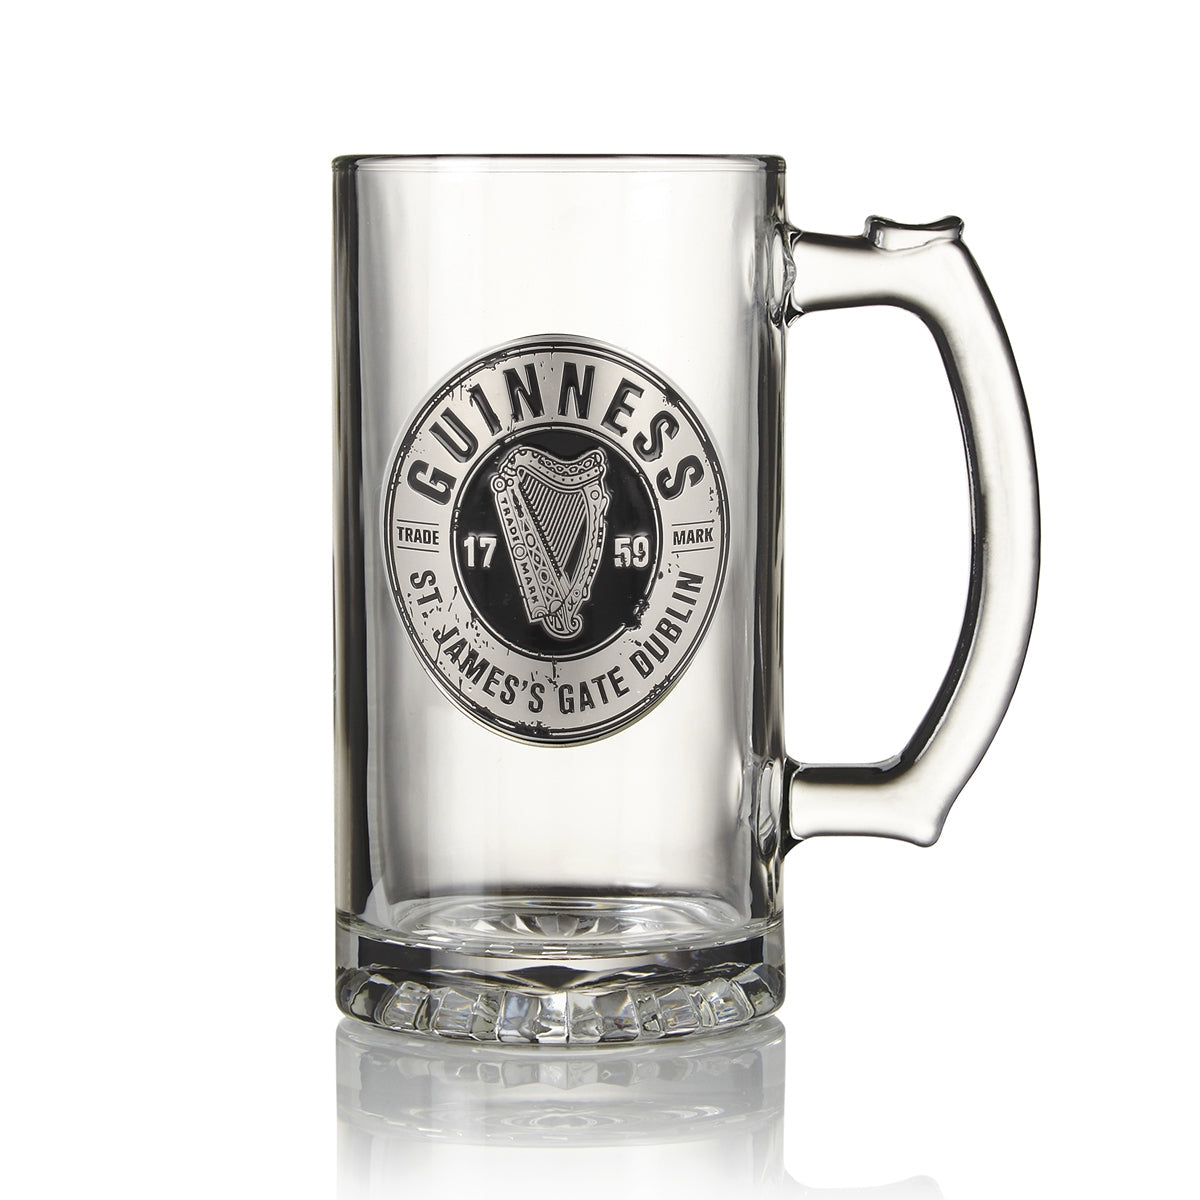 Guinness Pewter Logo Tankard featuring the Guinness logo in black, a perfect addition to any beer glass collection and part of the Guinness Official Merchandise.